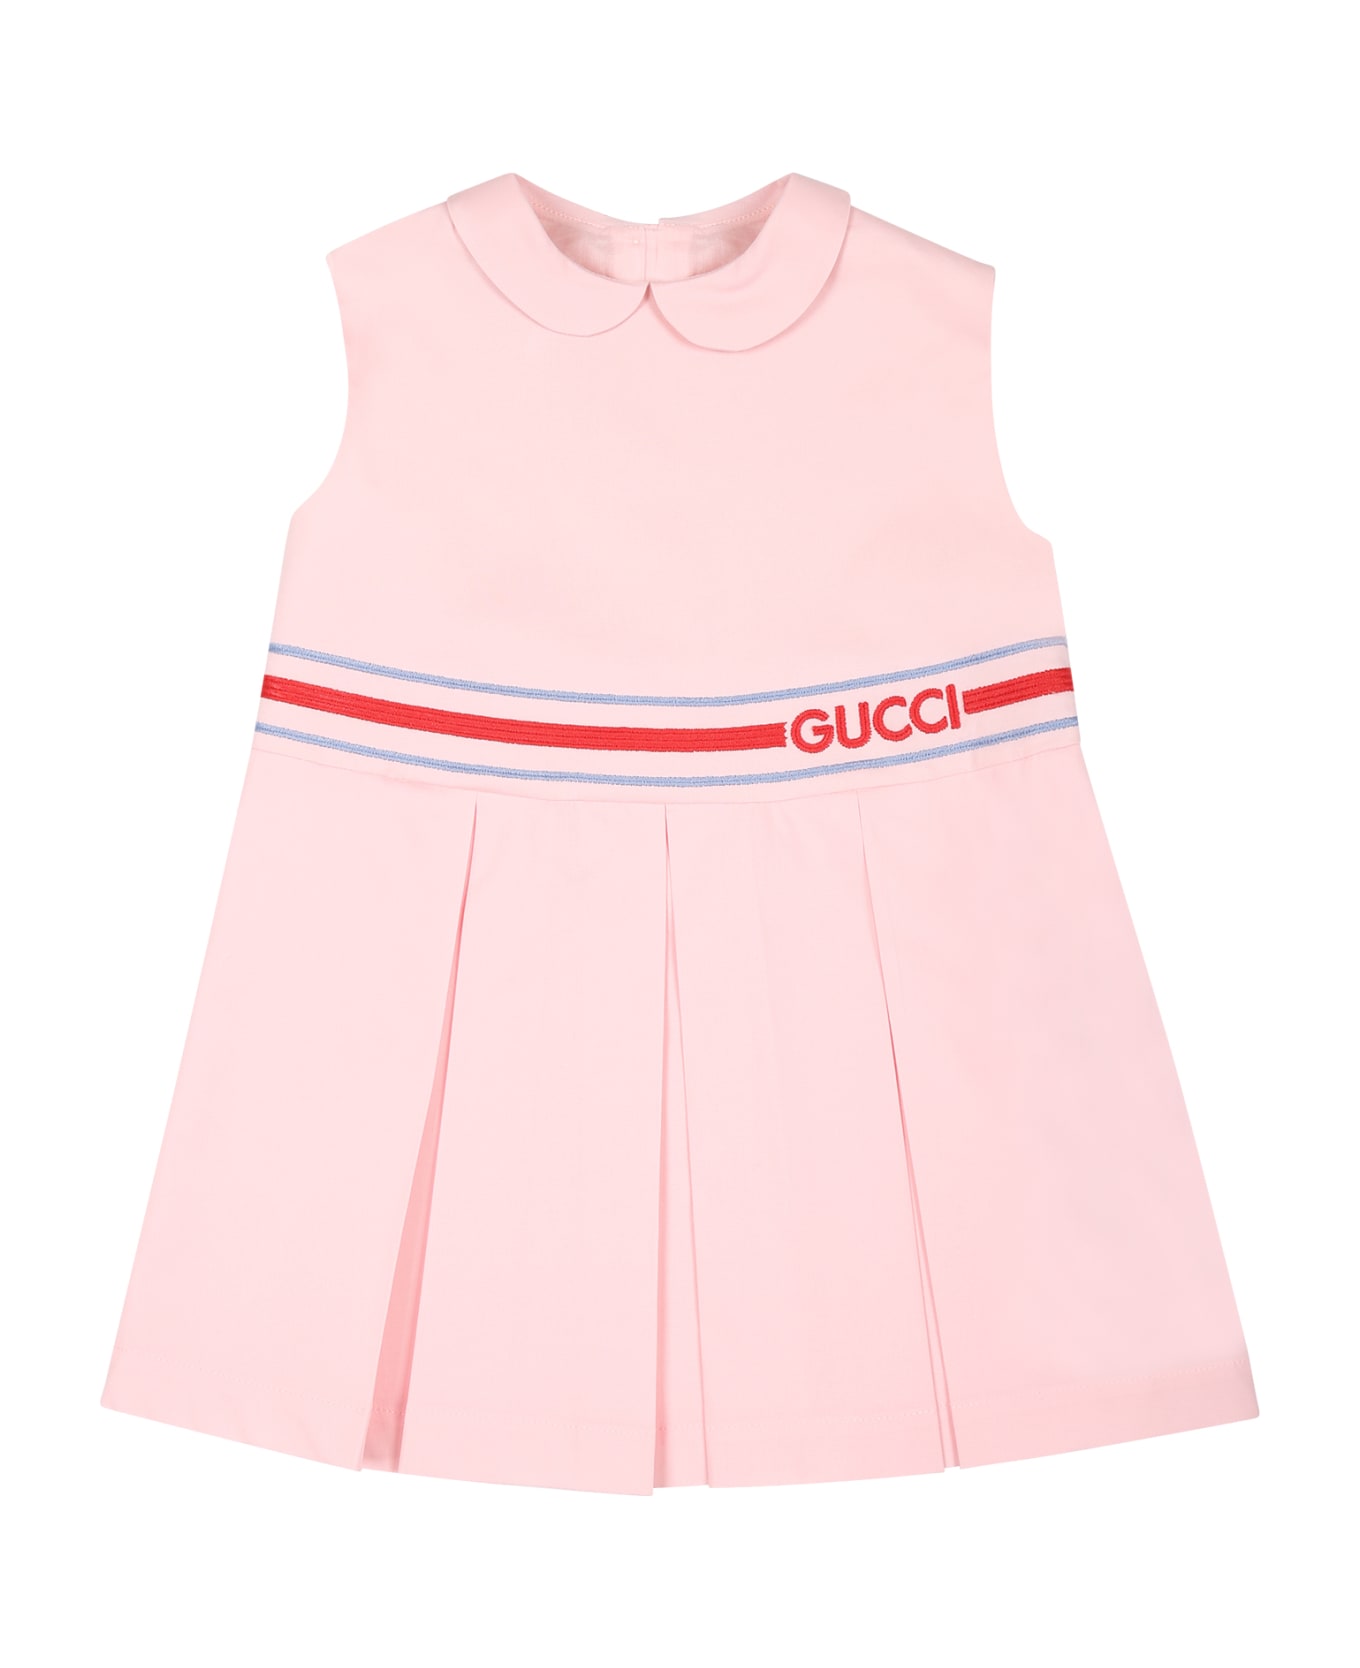 Gucci Pink Dress For Baby Girl With Logo - Pink